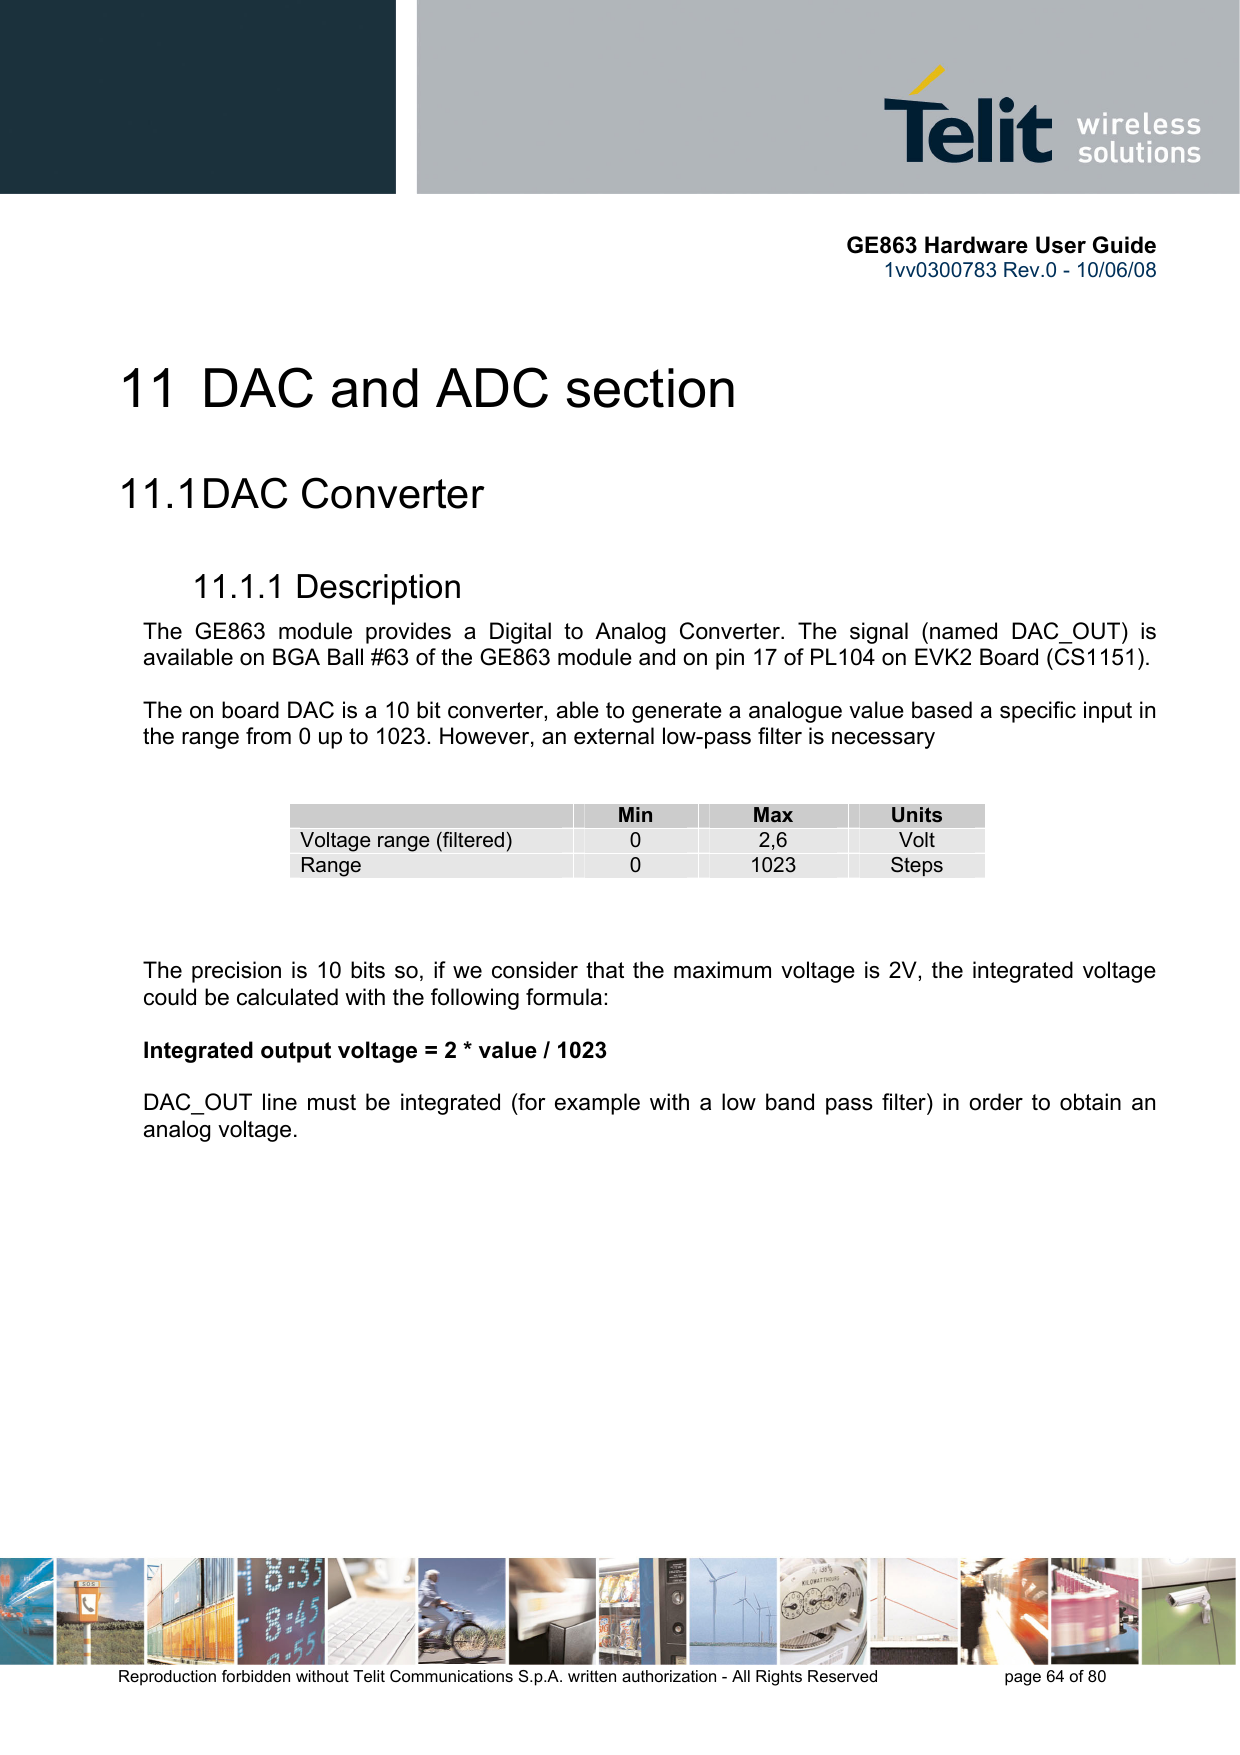       GE863 Hardware User Guide 1vv0300783 Rev.0 - 10/06/08 Reproduction forbidden without Telit Communications S.p.A. written authorization - All Rights Reserved    page 64 of 80  11  DAC and ADC section 11.1 DAC  Converter 11.1.1 Description The GE863 module provides a Digital to Analog Converter. The signal (named DAC_OUT) is available on BGA Ball #63 of the GE863 module and on pin 17 of PL104 on EVK2 Board (CS1151).  The on board DAC is a 10 bit converter, able to generate a analogue value based a specific input in the range from 0 up to 1023. However, an external low-pass filter is necessary    Min  Max  Units Voltage range (filtered)  0  2,6  Volt Range  0  1023  Steps    The precision is 10 bits so, if we consider that the maximum voltage is 2V, the integrated voltage could be calculated with the following formula:  Integrated output voltage = 2 * value / 1023  DAC_OUT line must be integrated (for example with a low band pass filter) in order to obtain an analog voltage. 